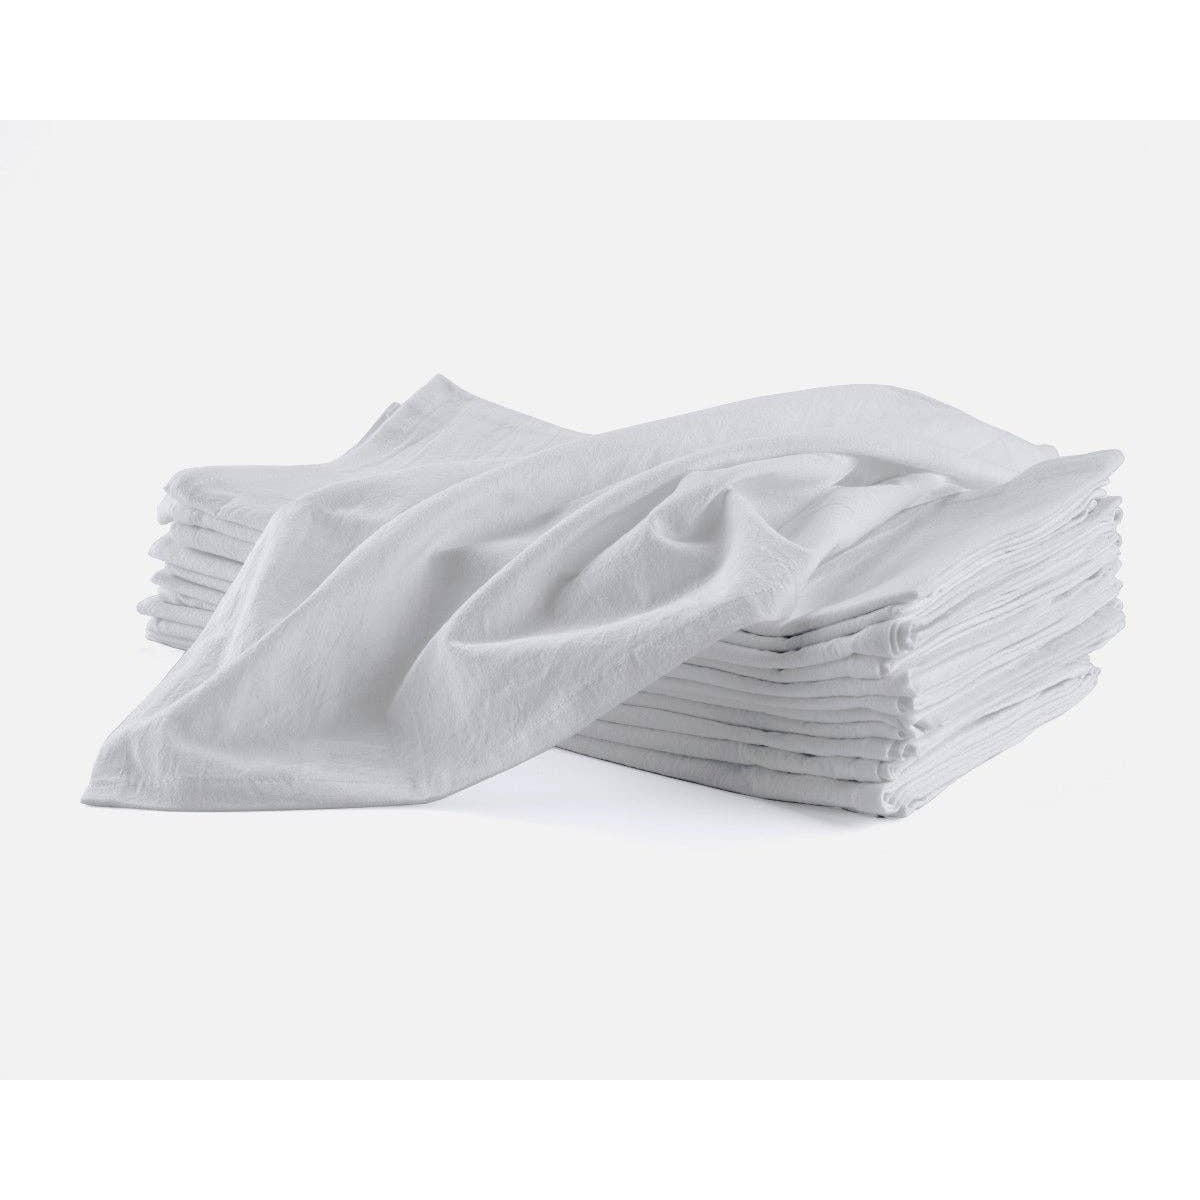 Mary's 27" X 27" Kitchen Towels - Flour Sack Towels